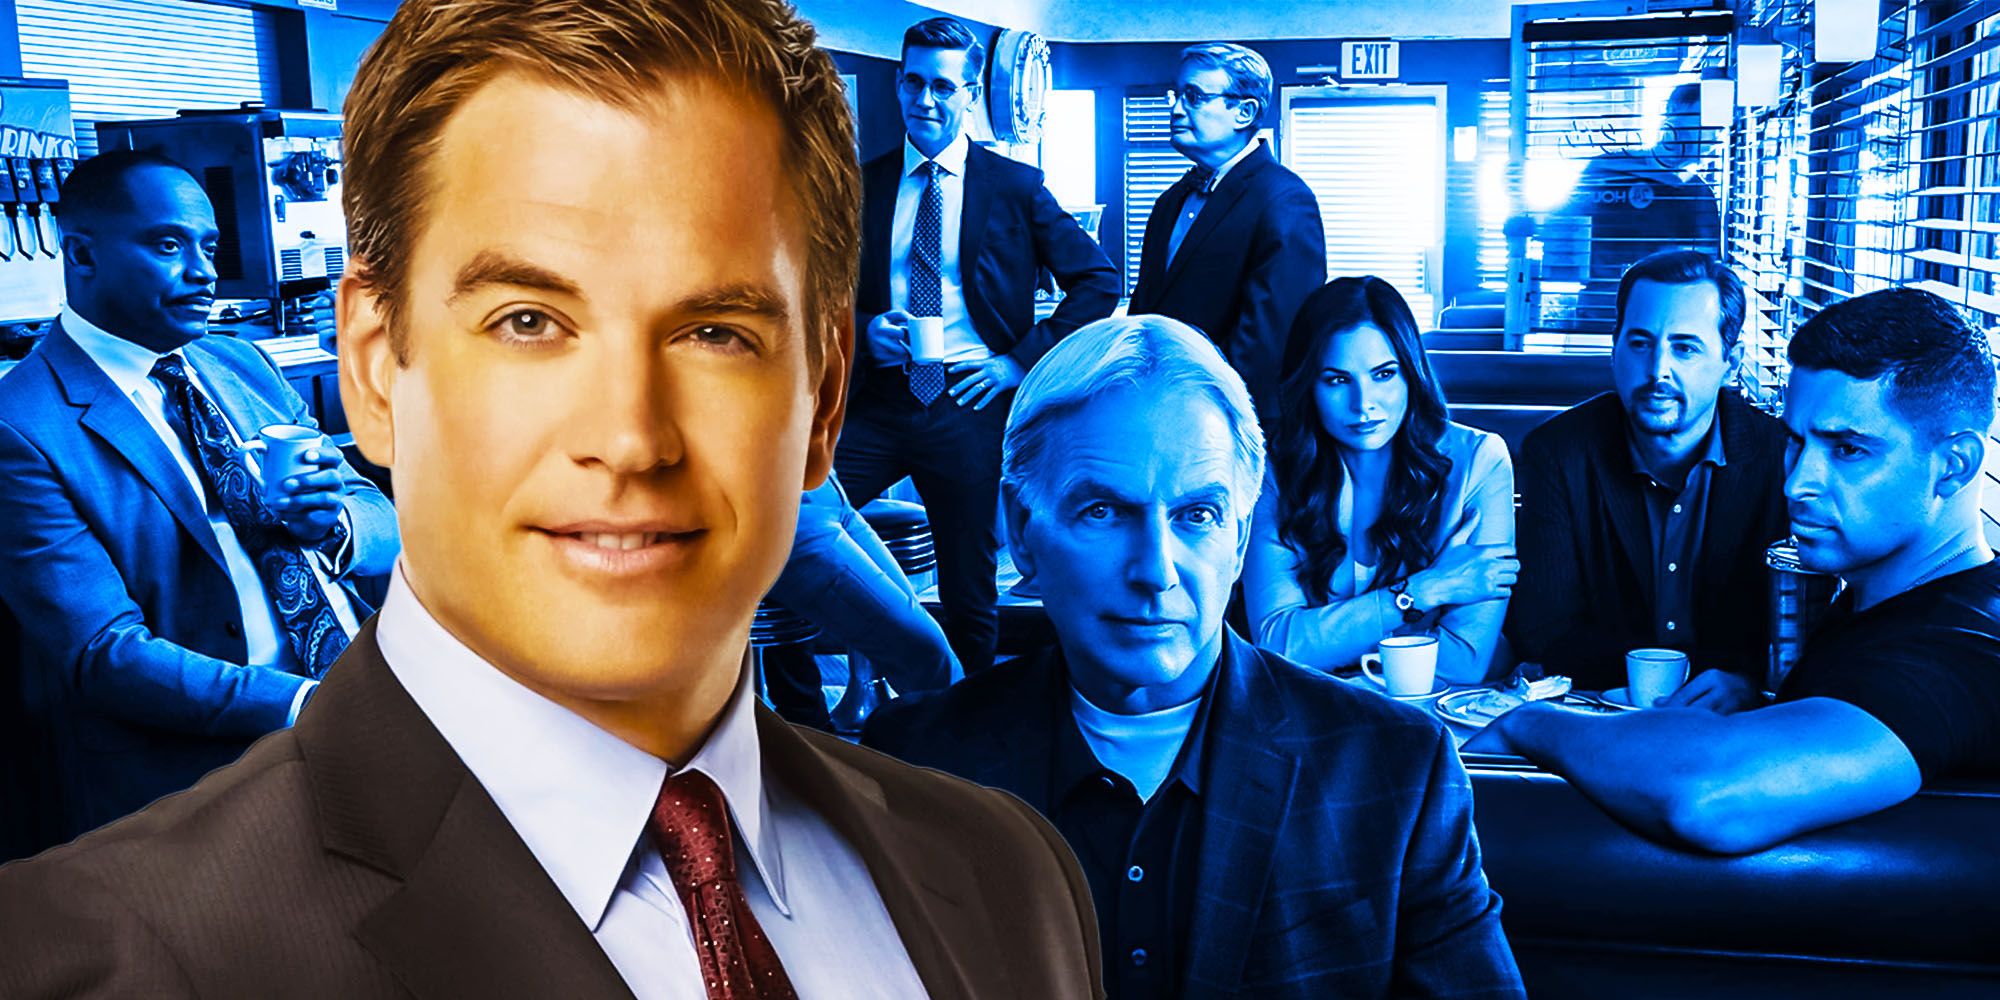 A composite image of Michael Weatherly as Tony DiNozzo in front of the cast of NCIS 